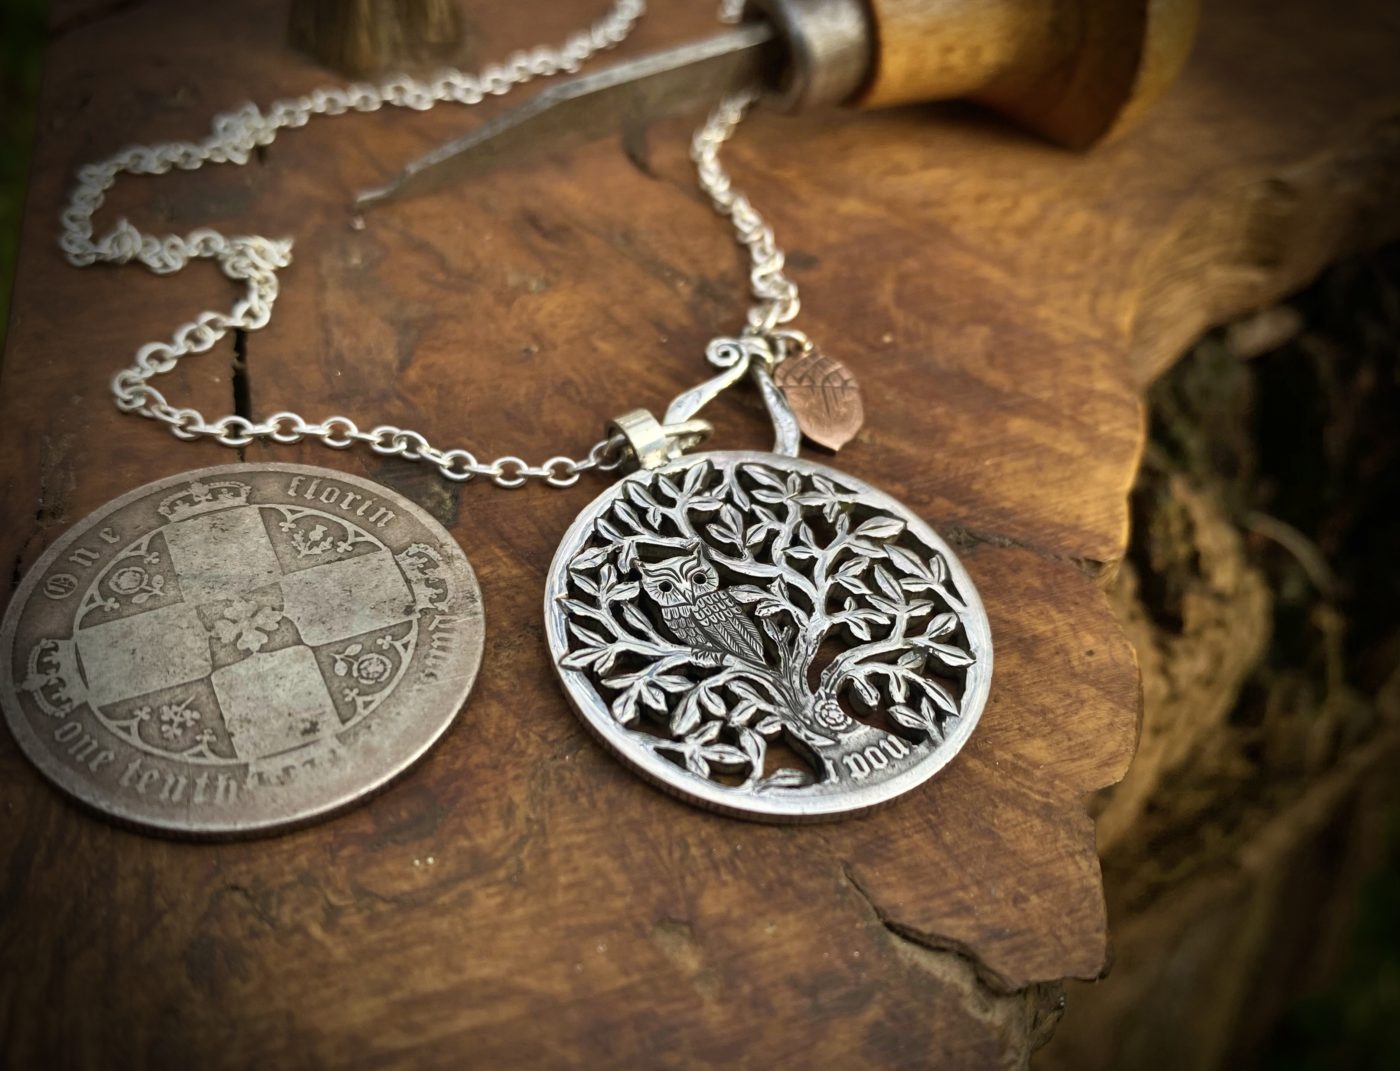 Tree of life silver coin necklace handcrafted and recycled ethical jewellery created at an artisan jewellery studio workshop in Cambridge, England. Eco-conscious, green and eco-friendly jewellery.